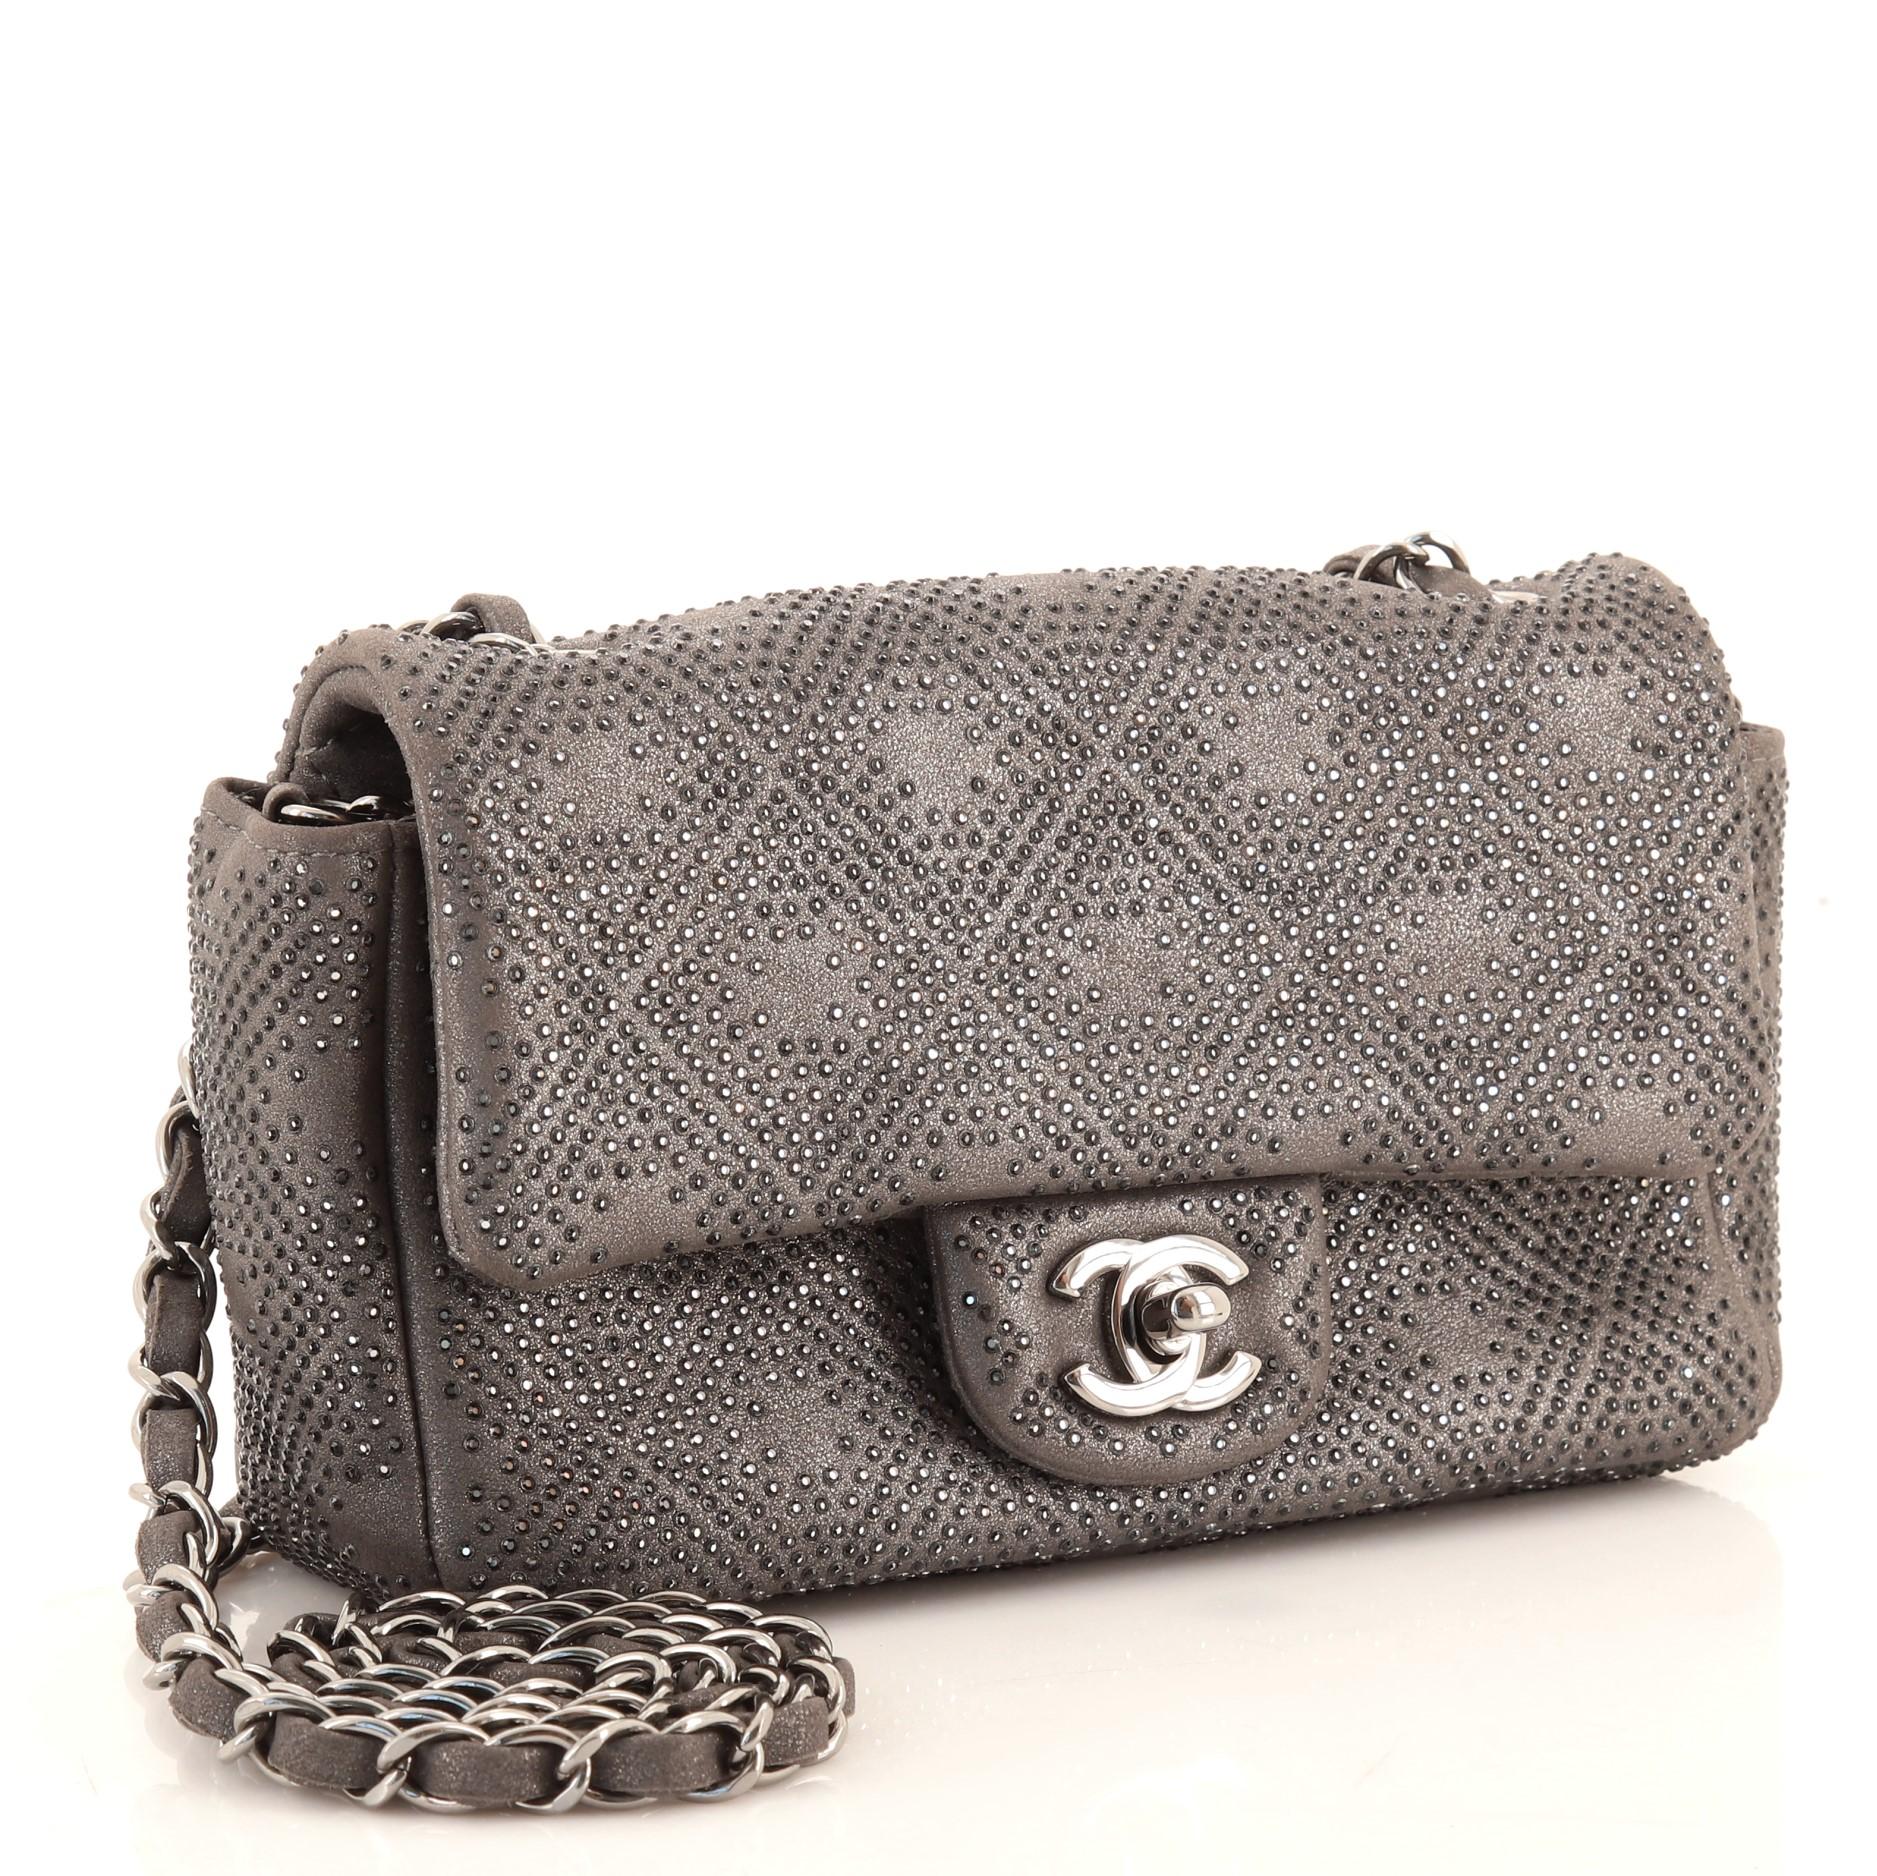 Gray Chanel Mineral Nights Crossbody Bag Strass Embellished Leather Mini